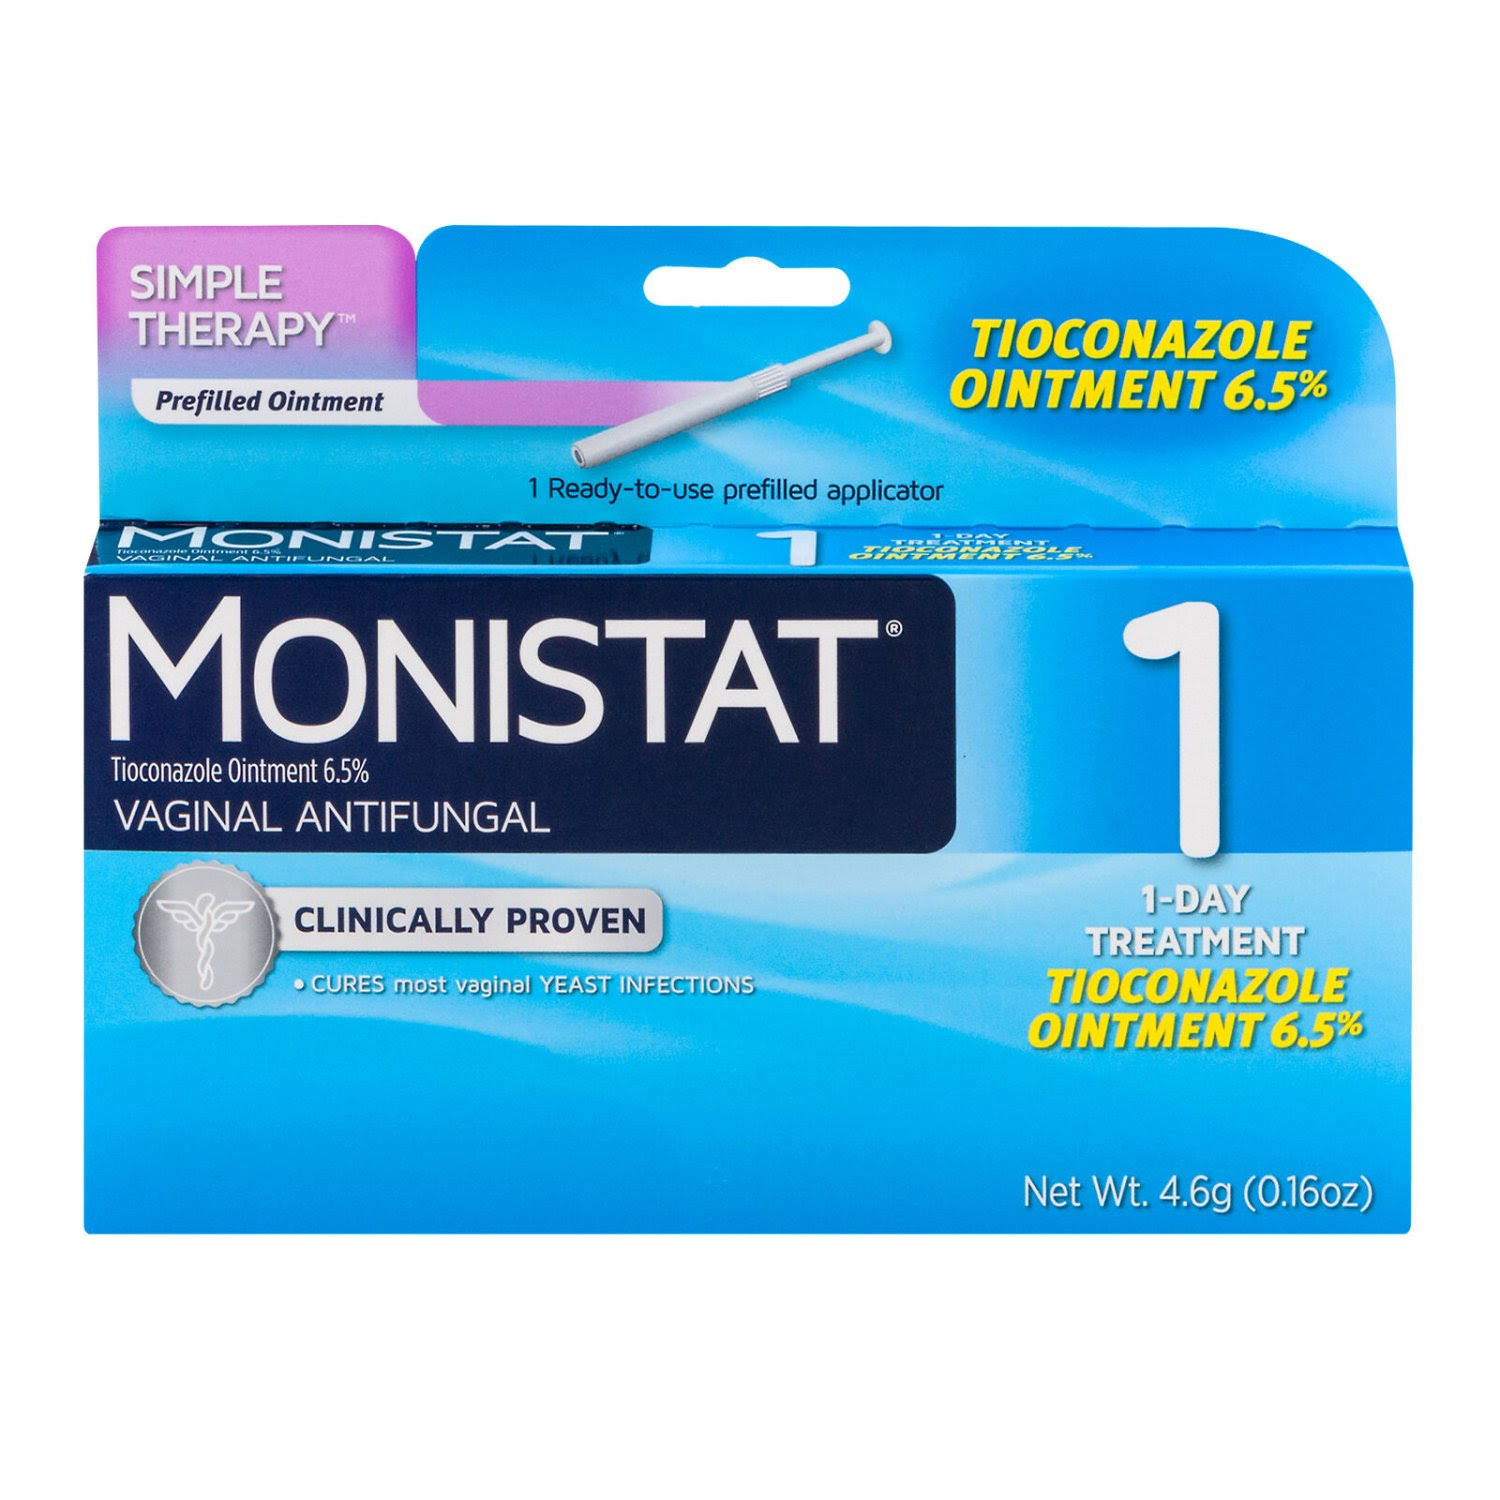 Monistat Simple Therapy Vaginal Antifungal - 4.6g